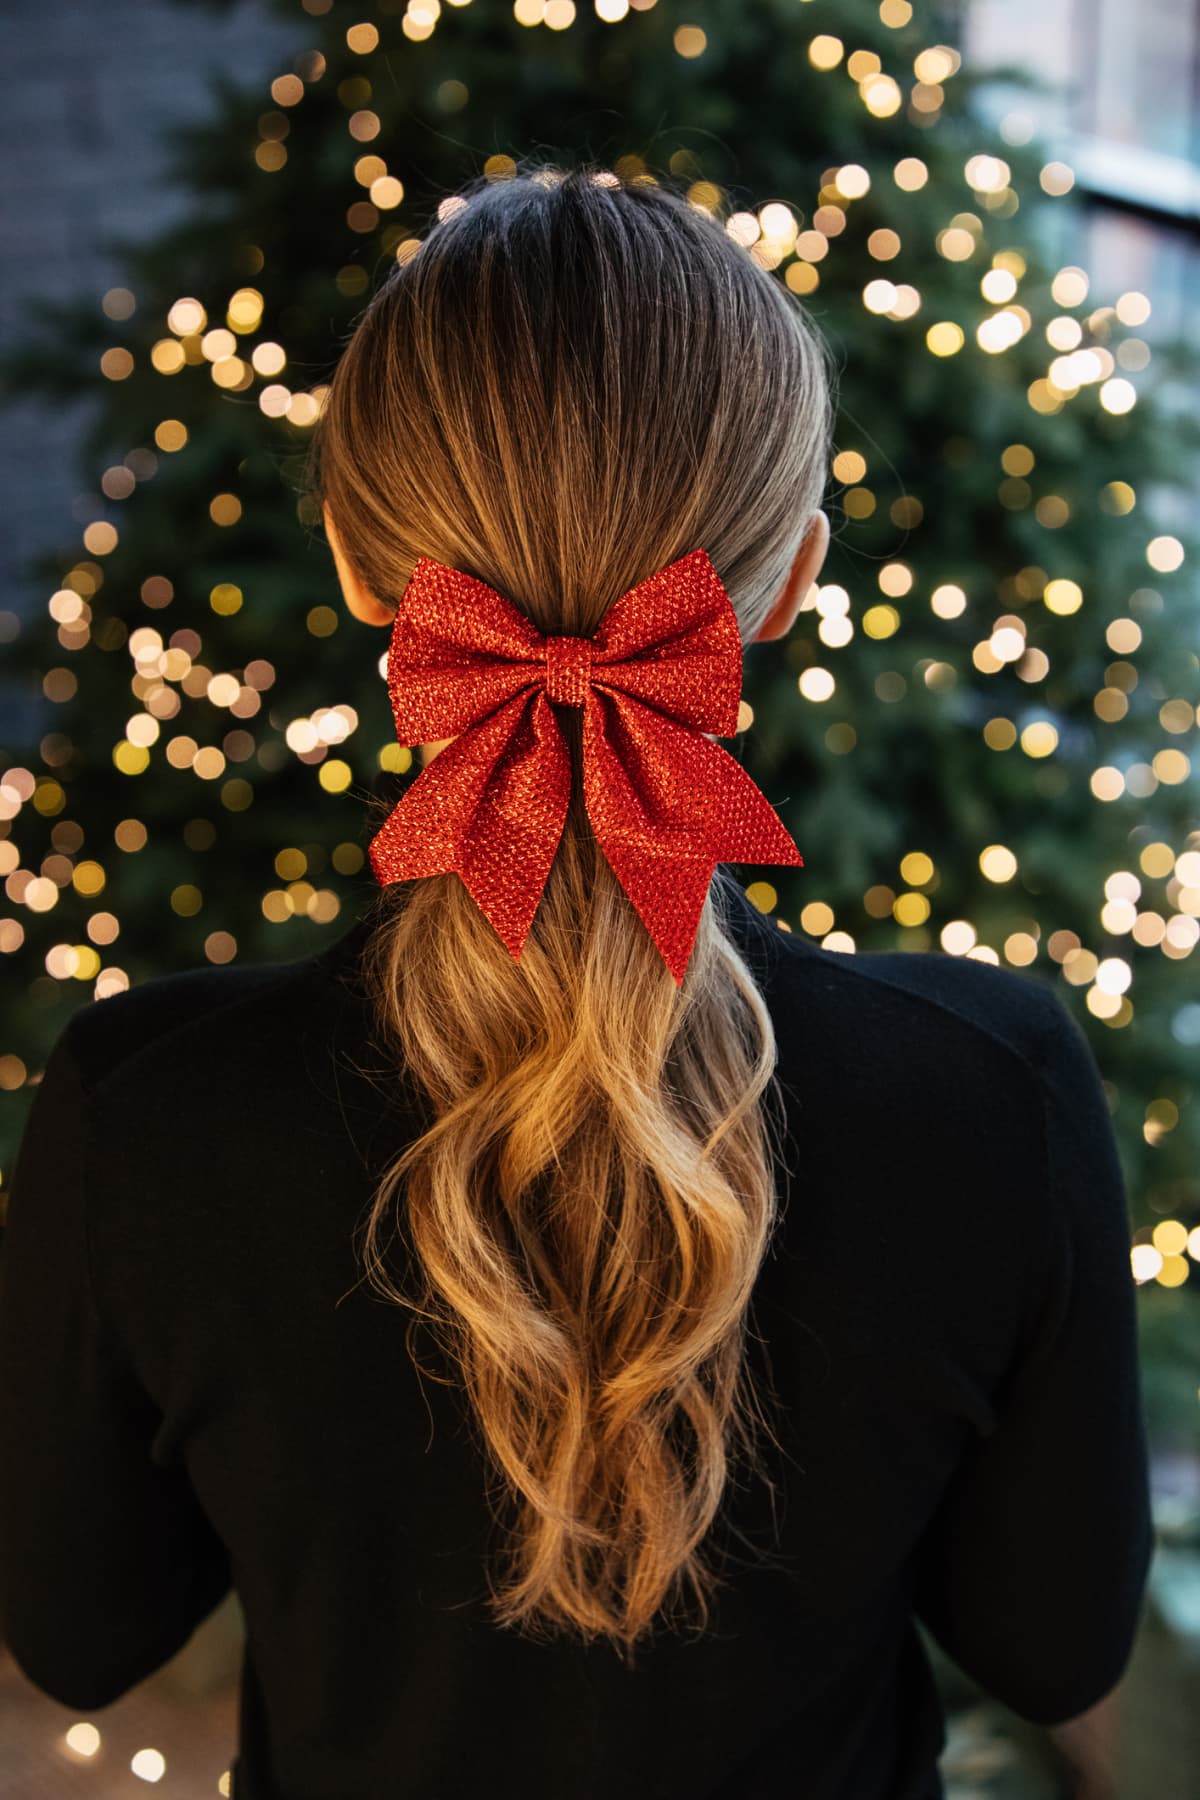 Girl with long blondie hair and red bow hair